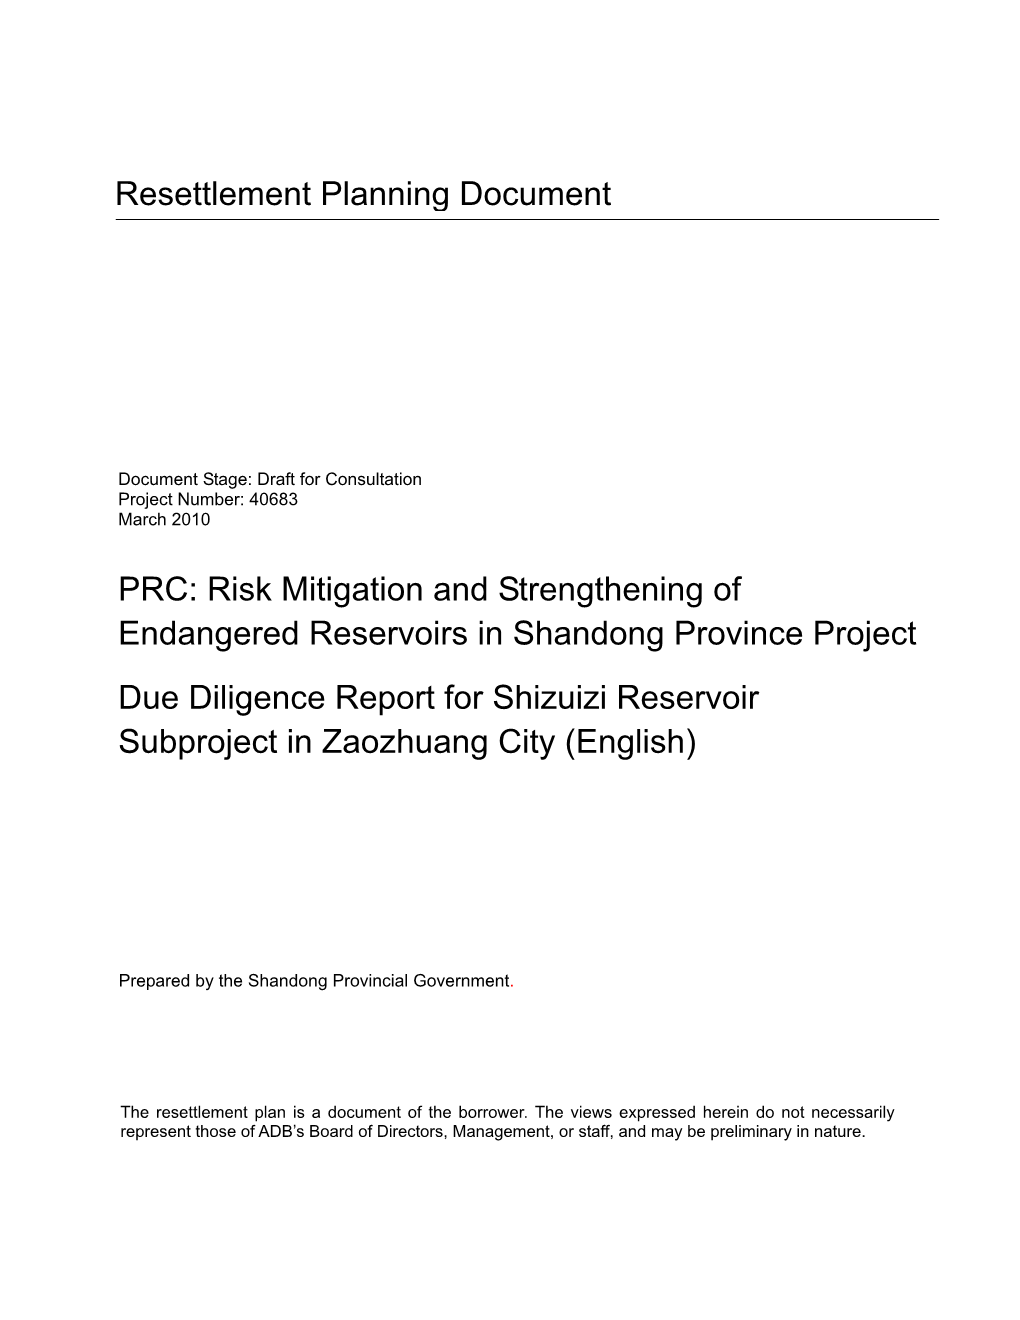 Resettlement Planning Document PRC: Risk Mitigation And